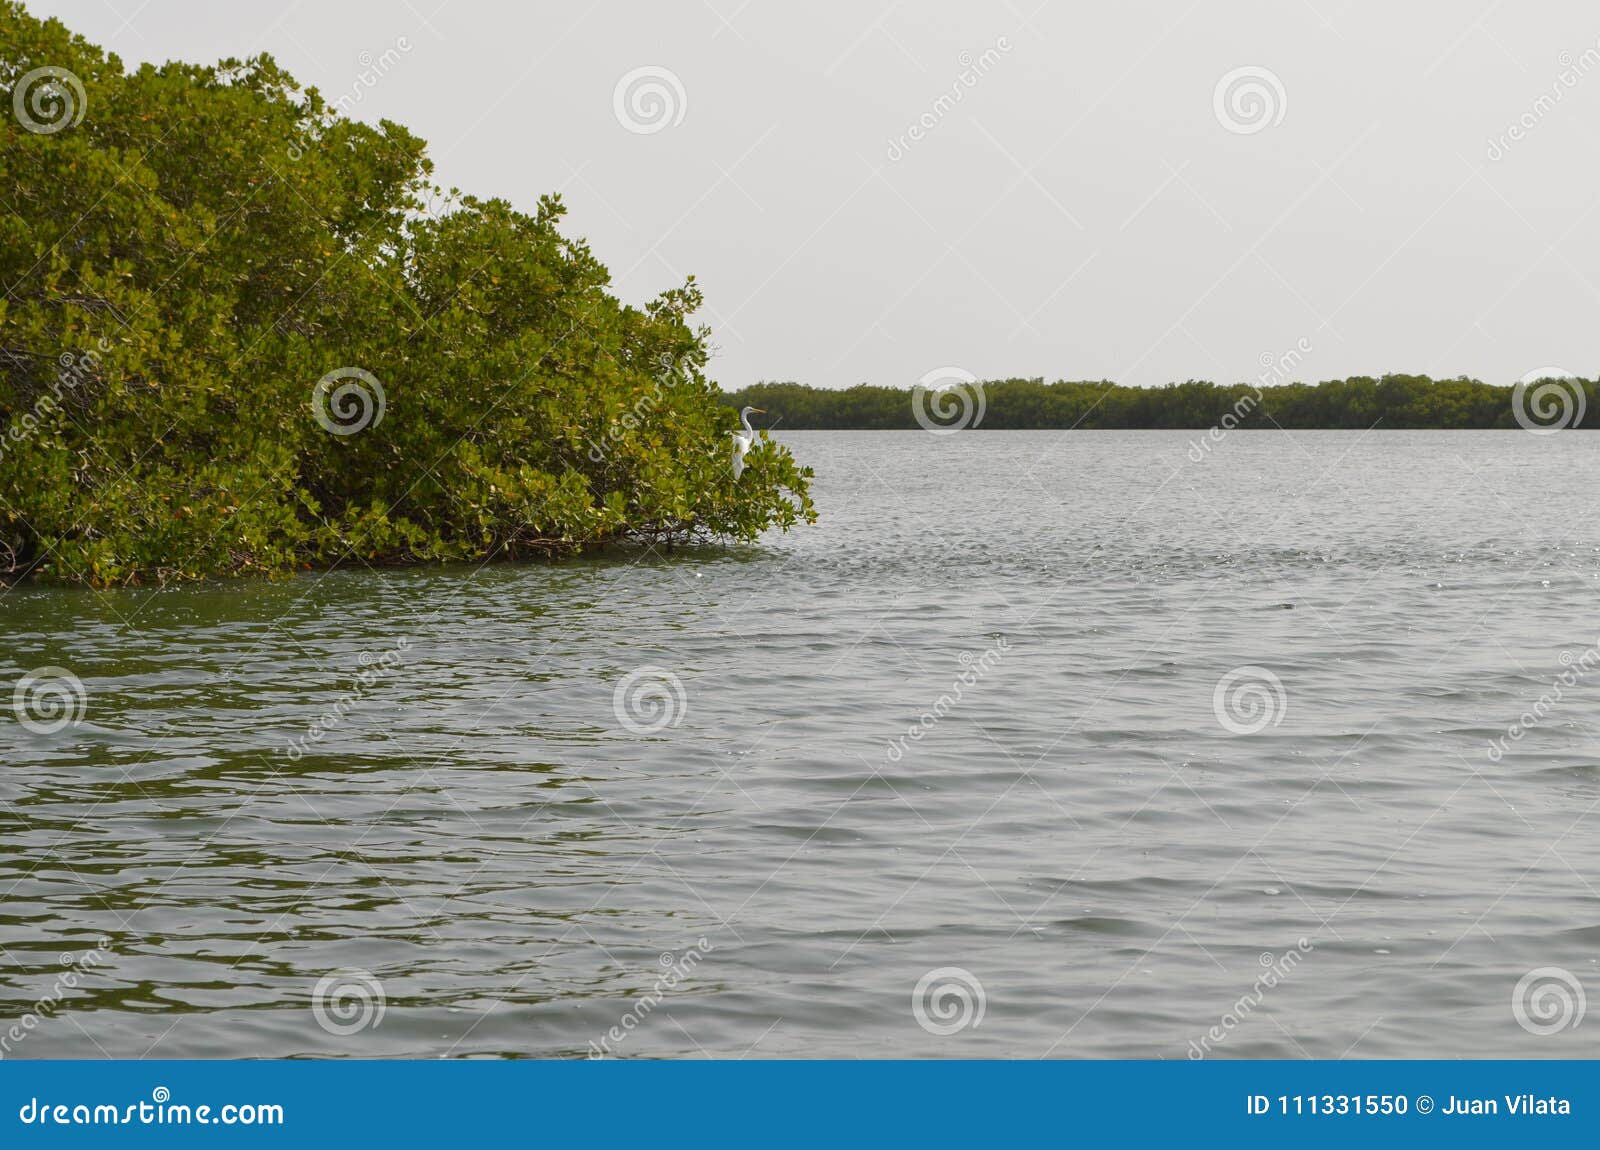 mangrove forests in the saloum river delta area, senegal, west africa